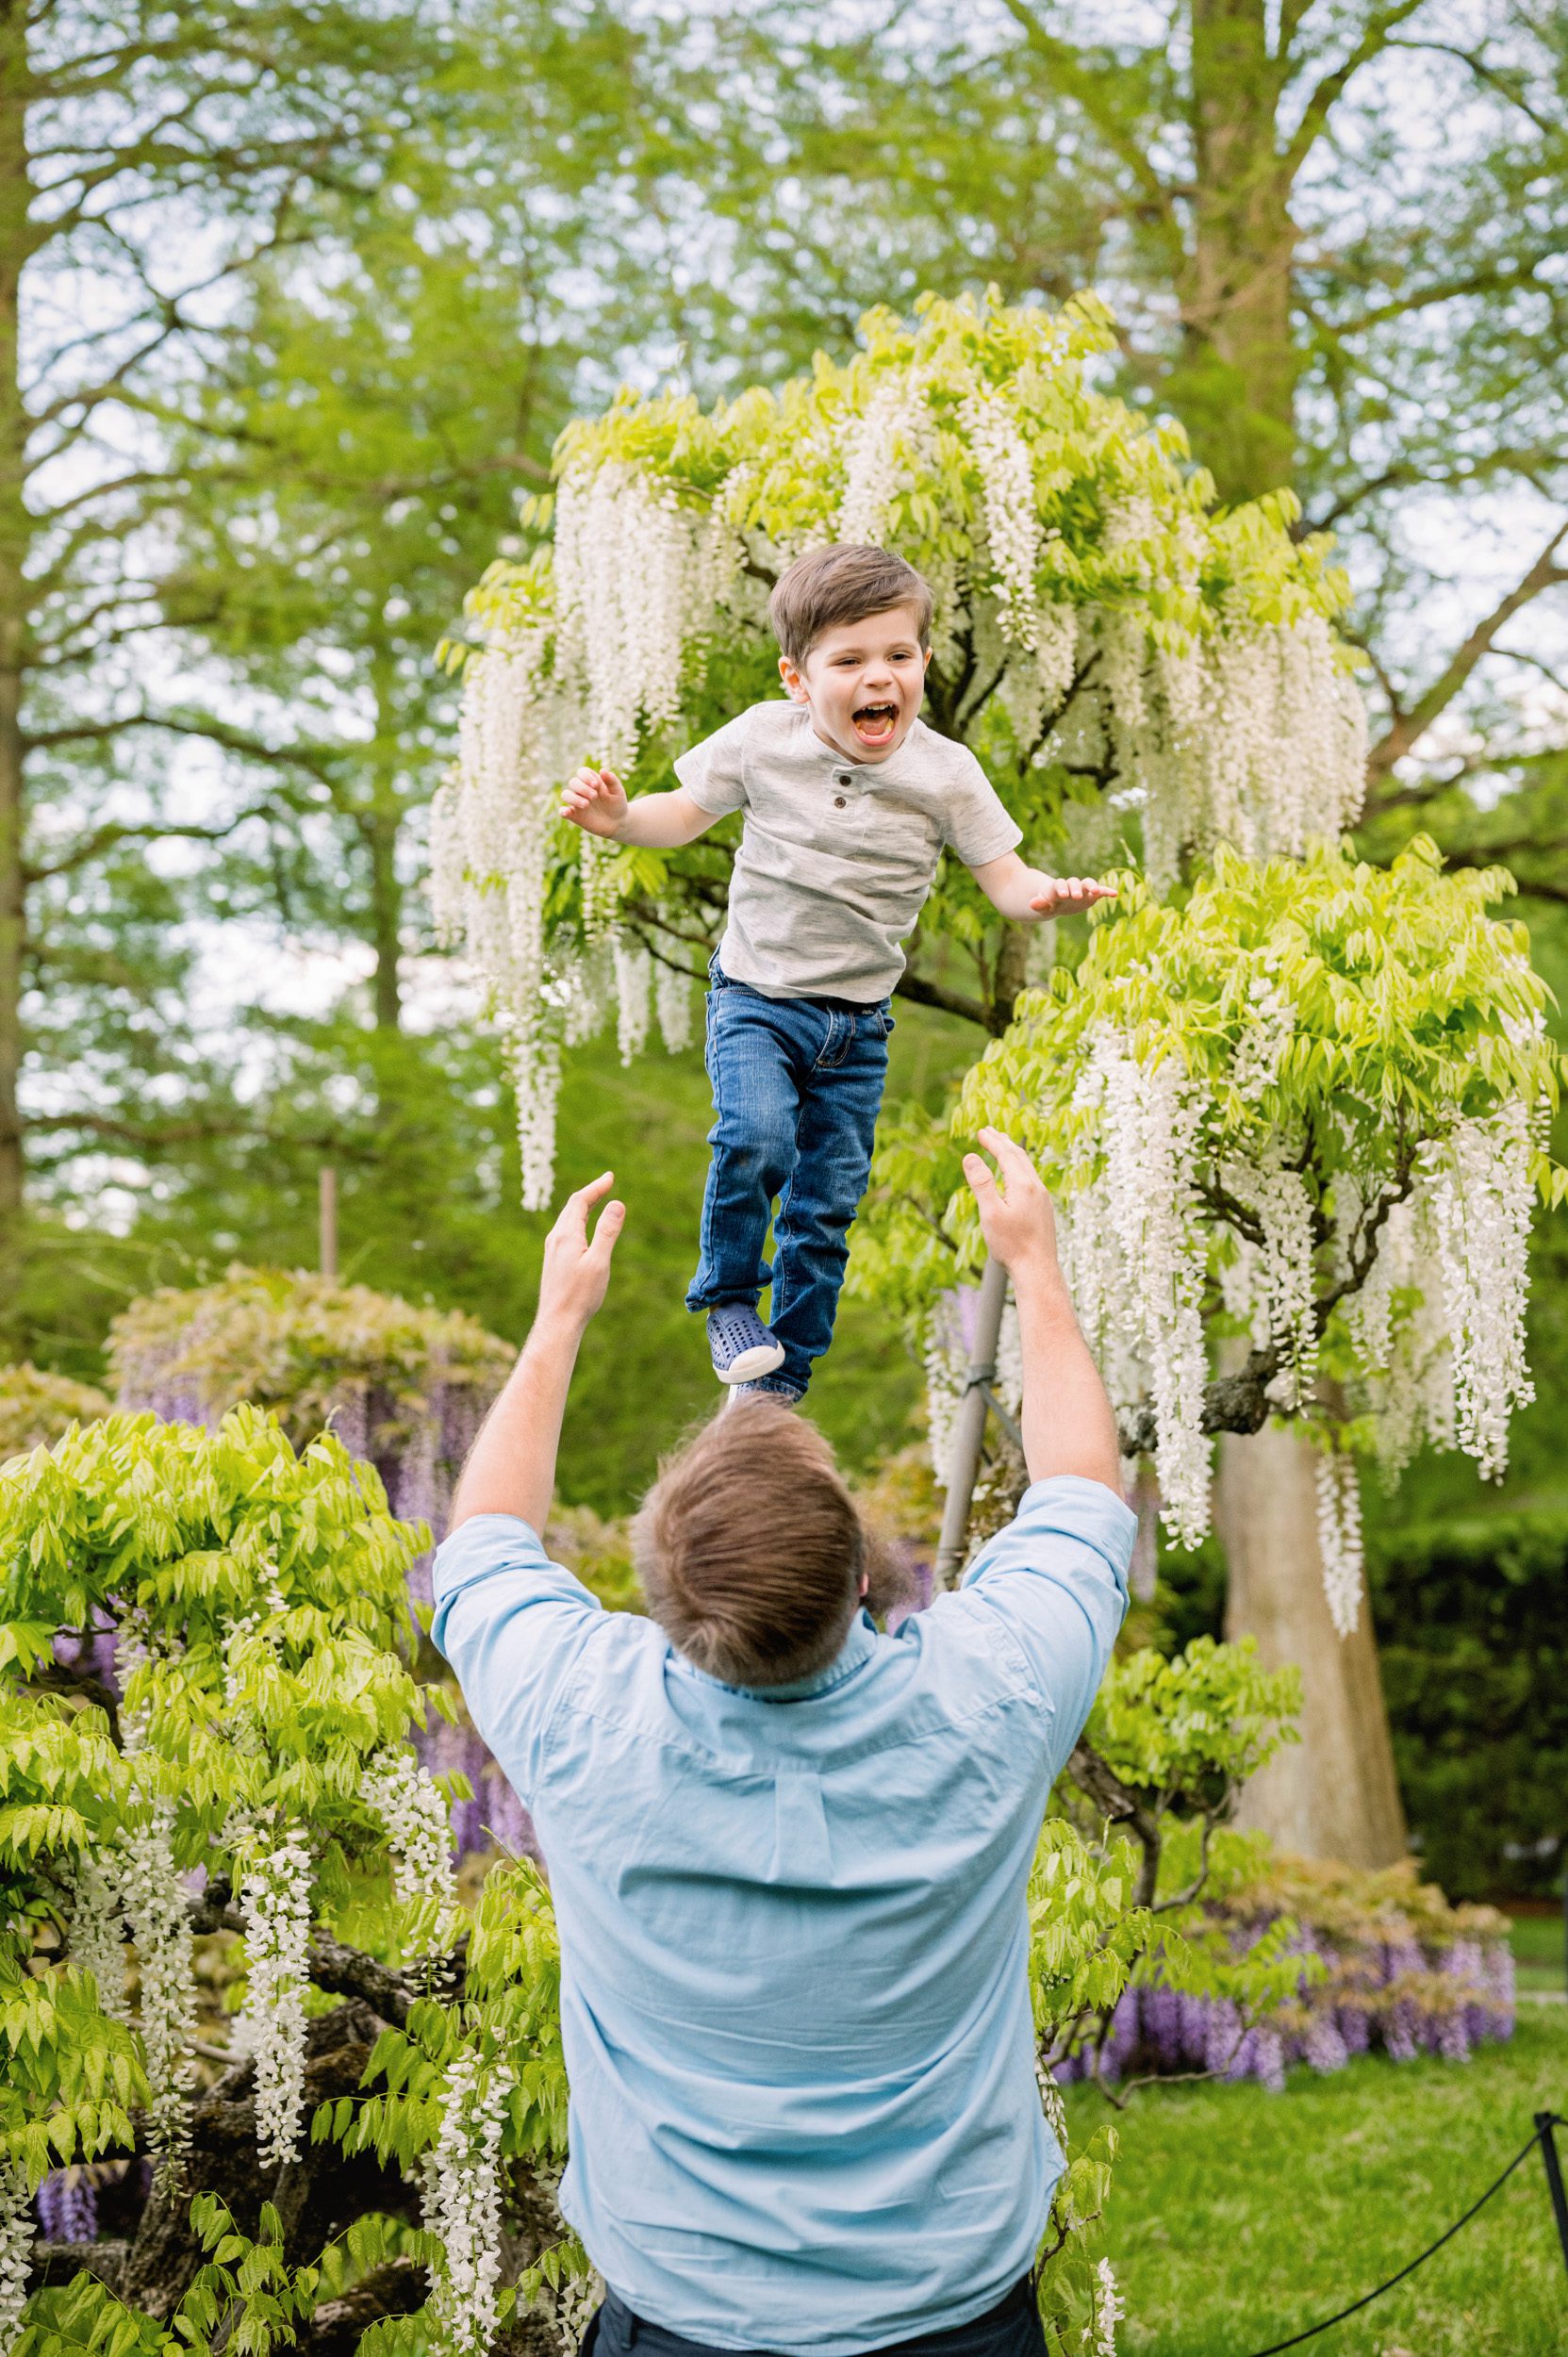 A little boy squealing with excitement as his dad throws him up in the air in a Wisteria garden during a family photoshoot